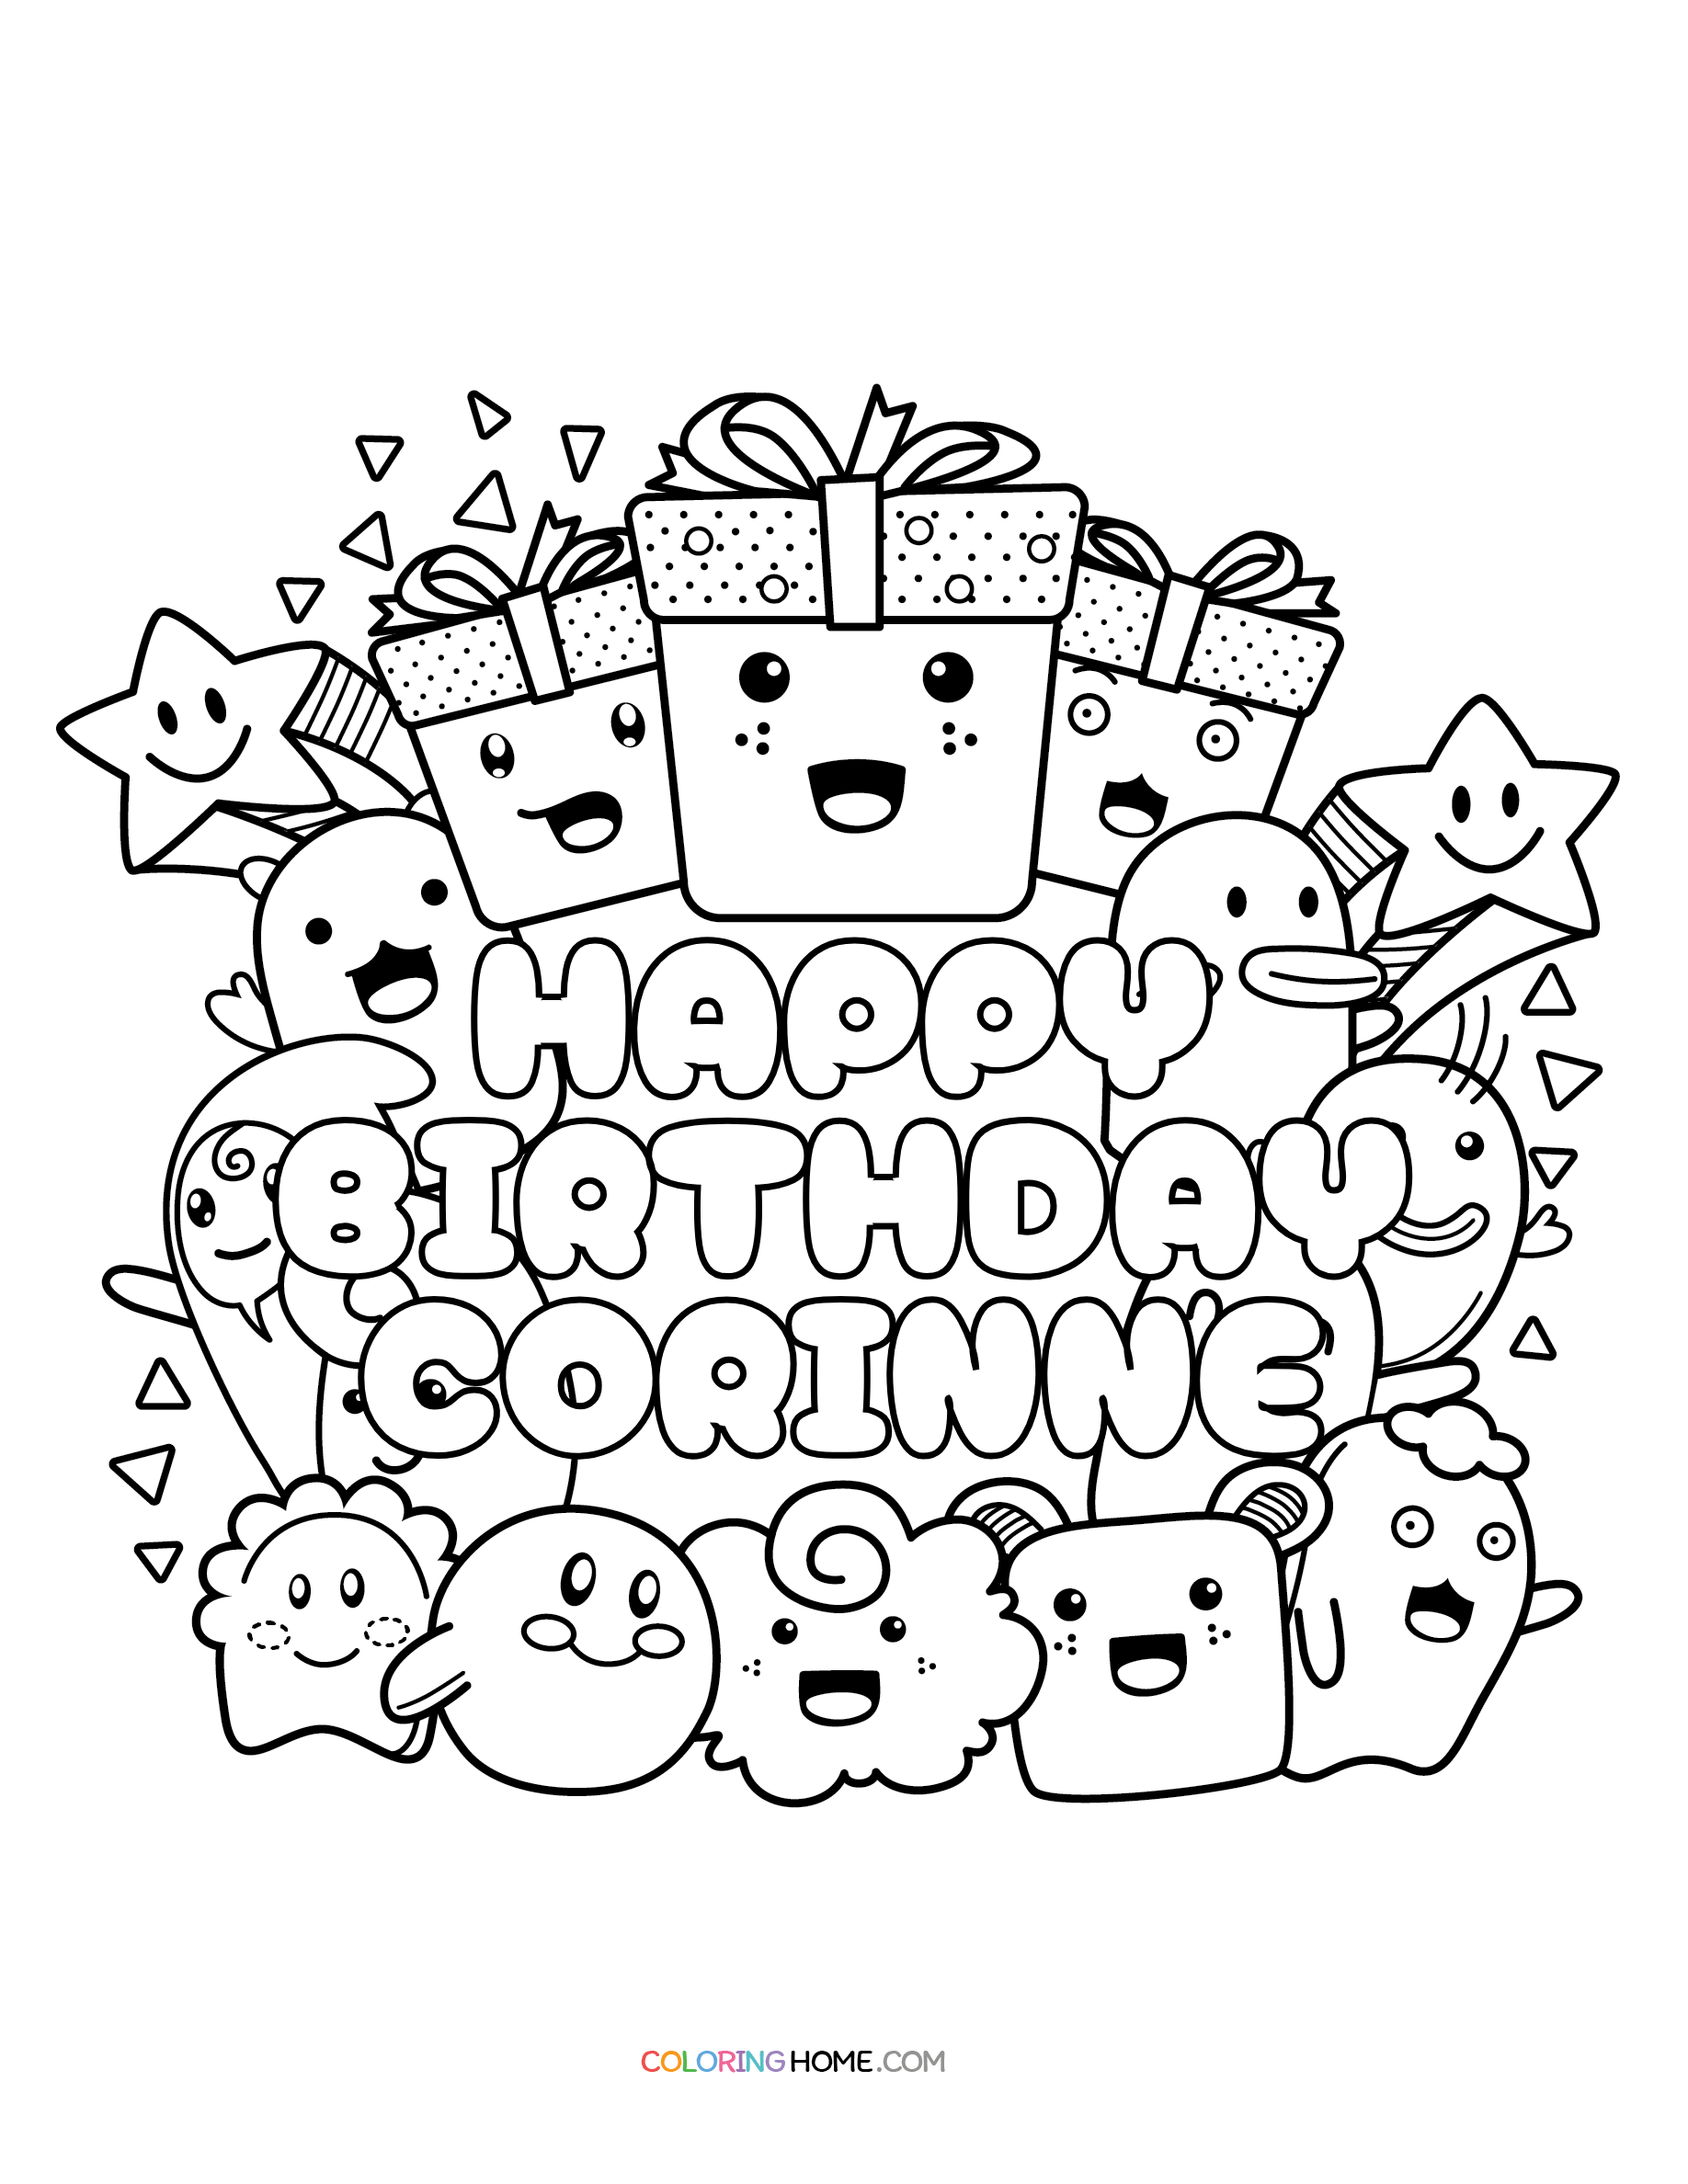 Happy Birthday Corinne coloring page